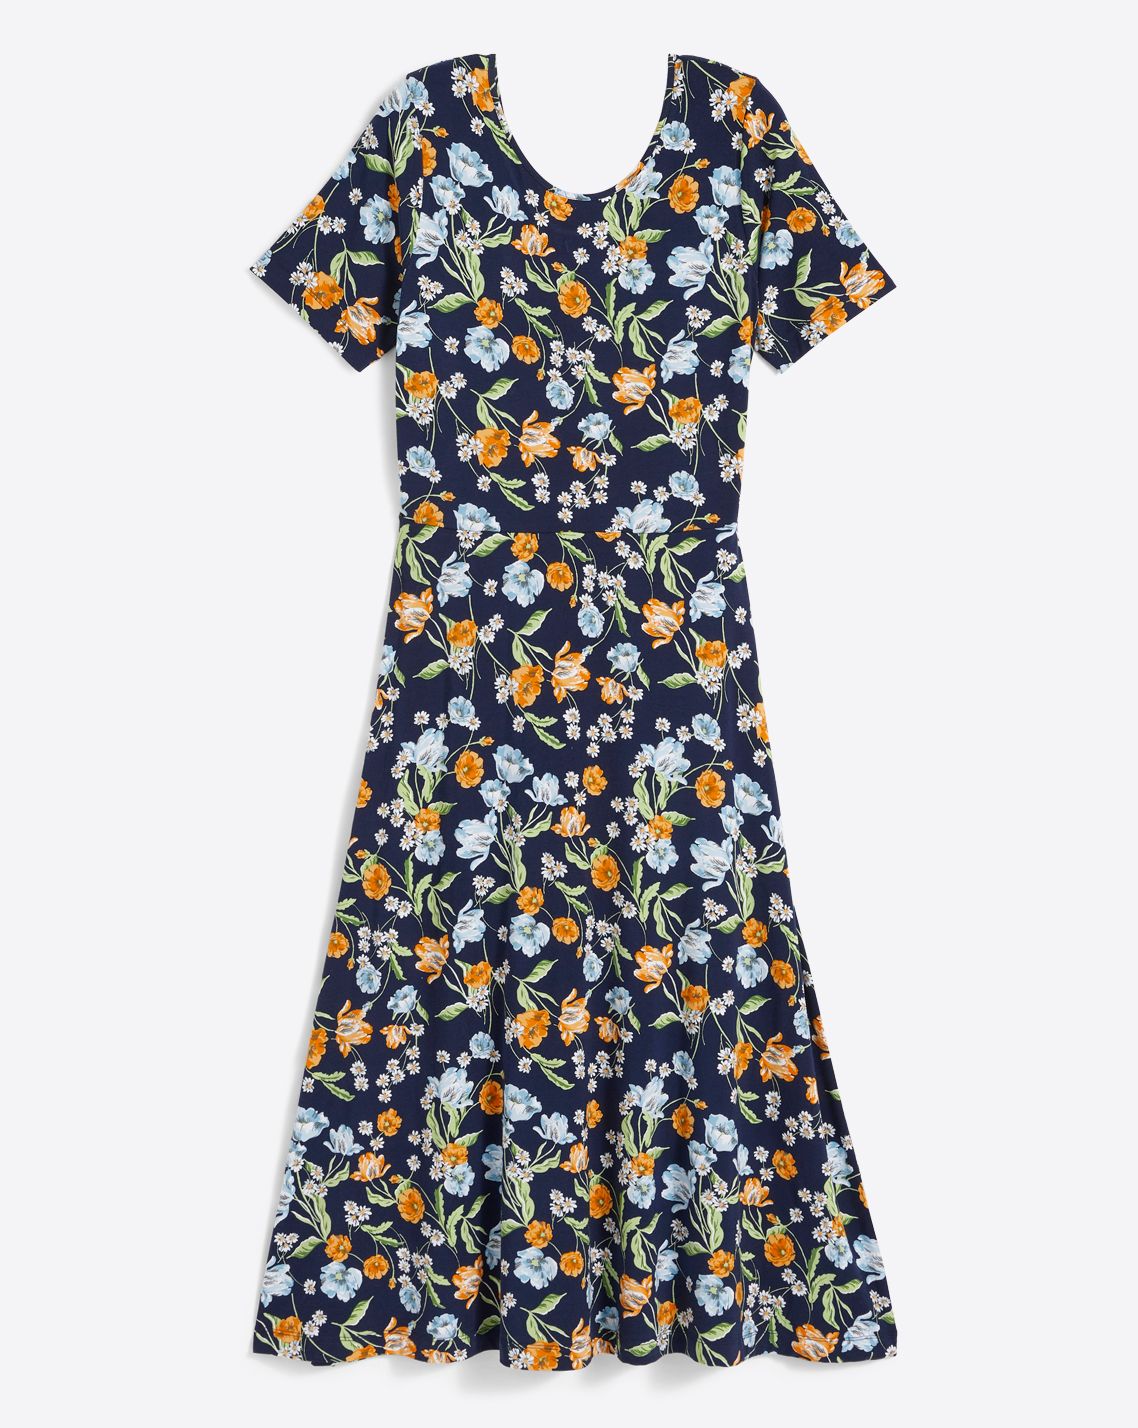 Tammy T-Shirt Dress in Spring Blooms